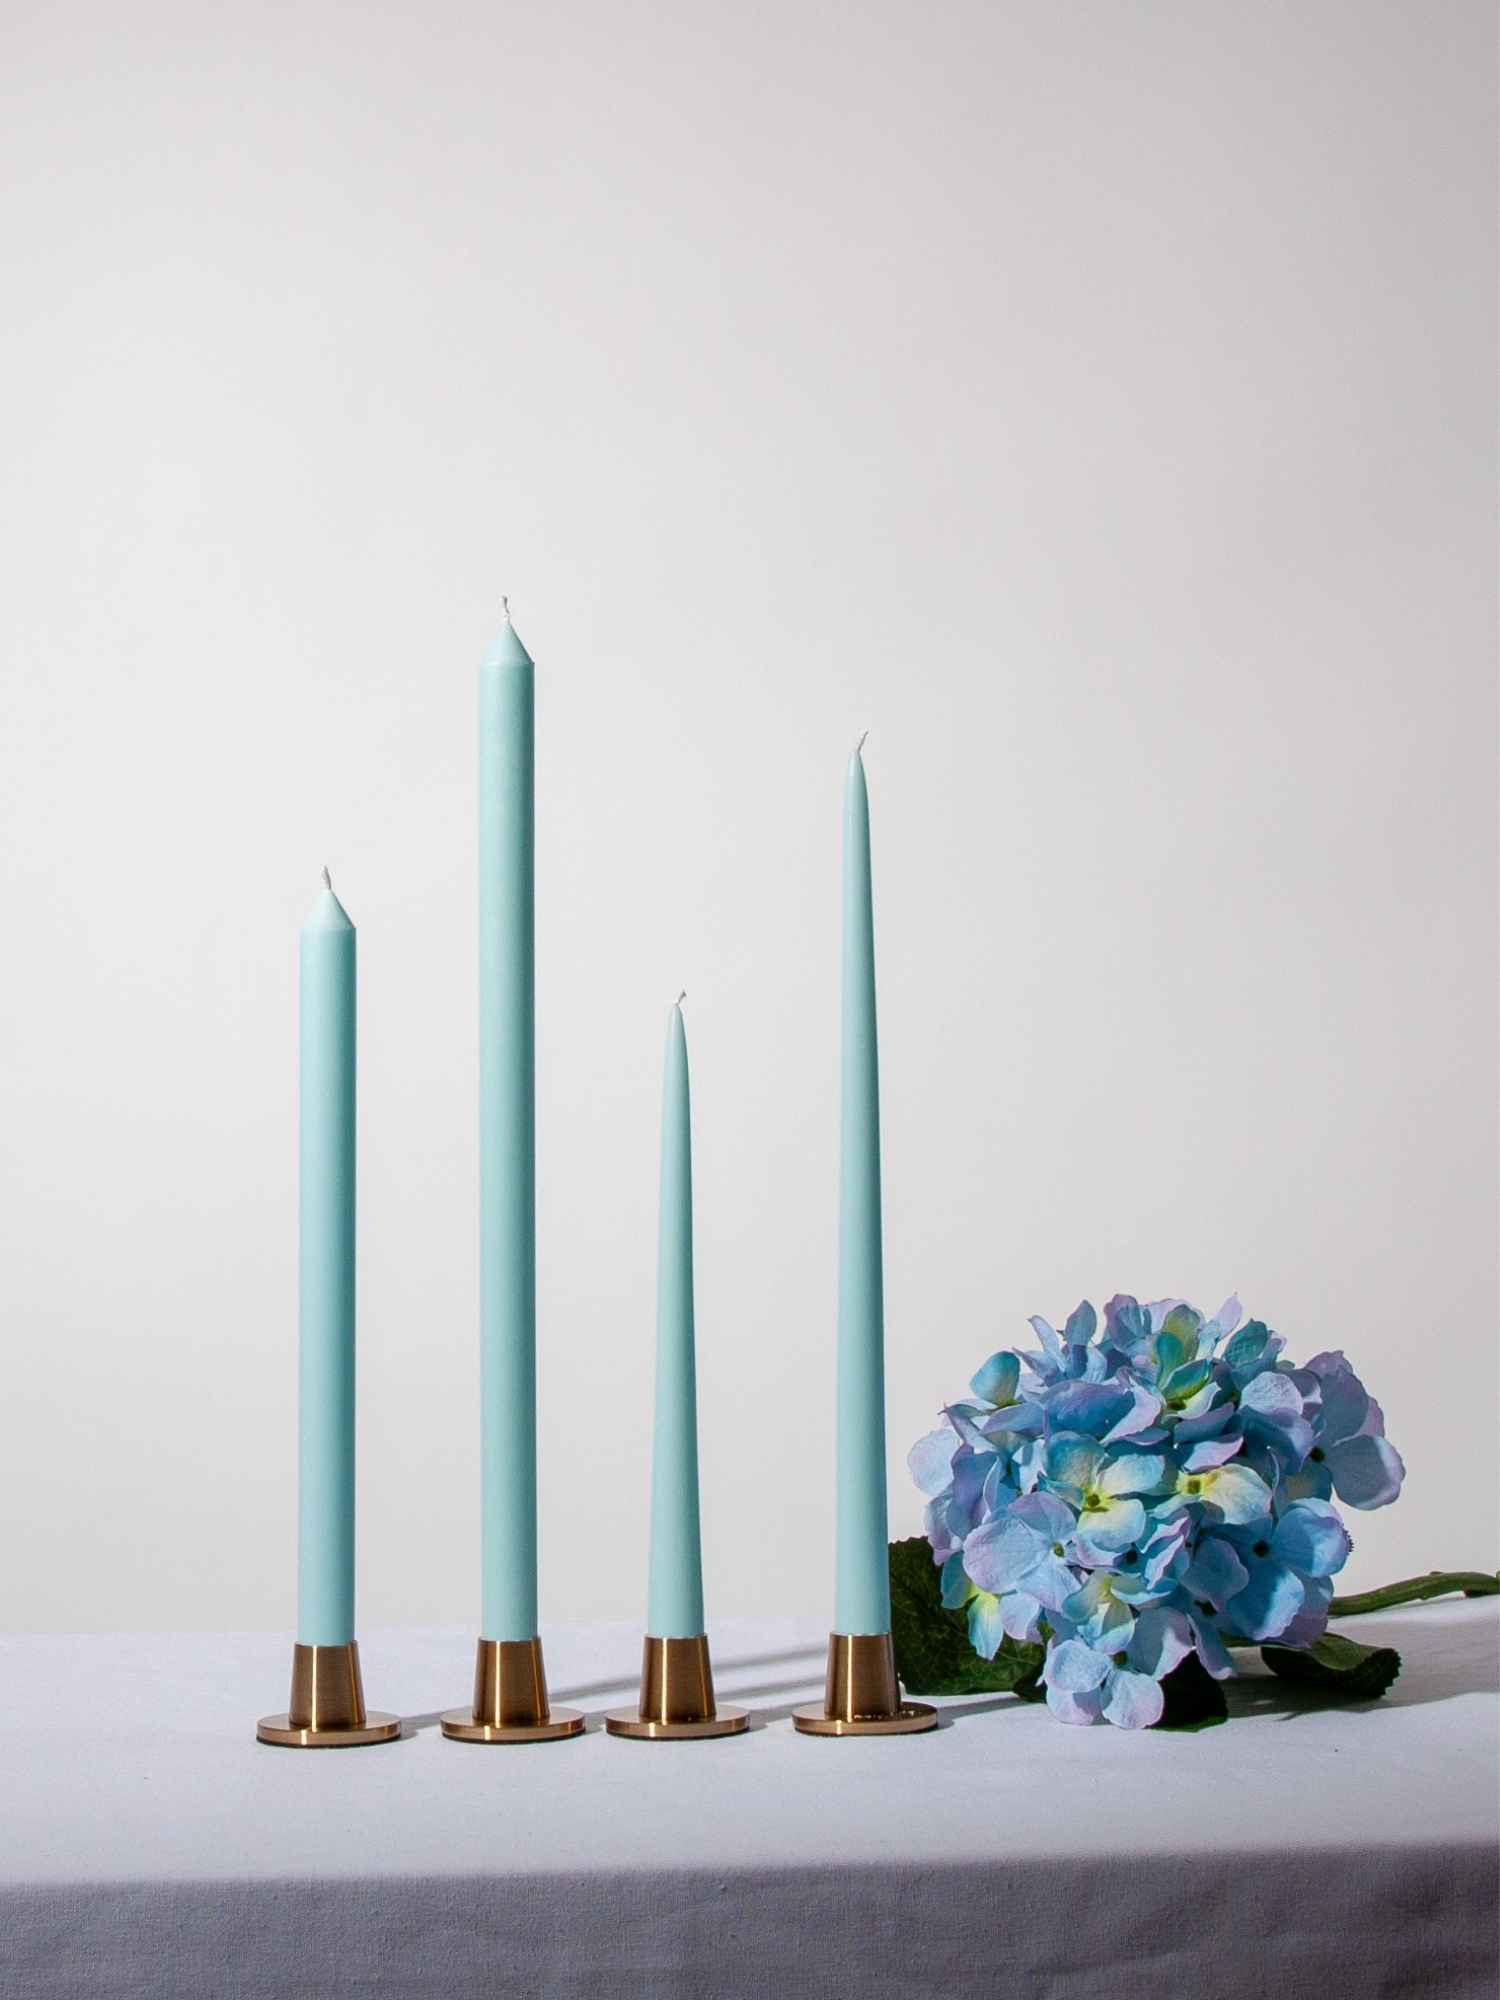 Pastel Teal 30cm Dinner Candle, Pack of 4